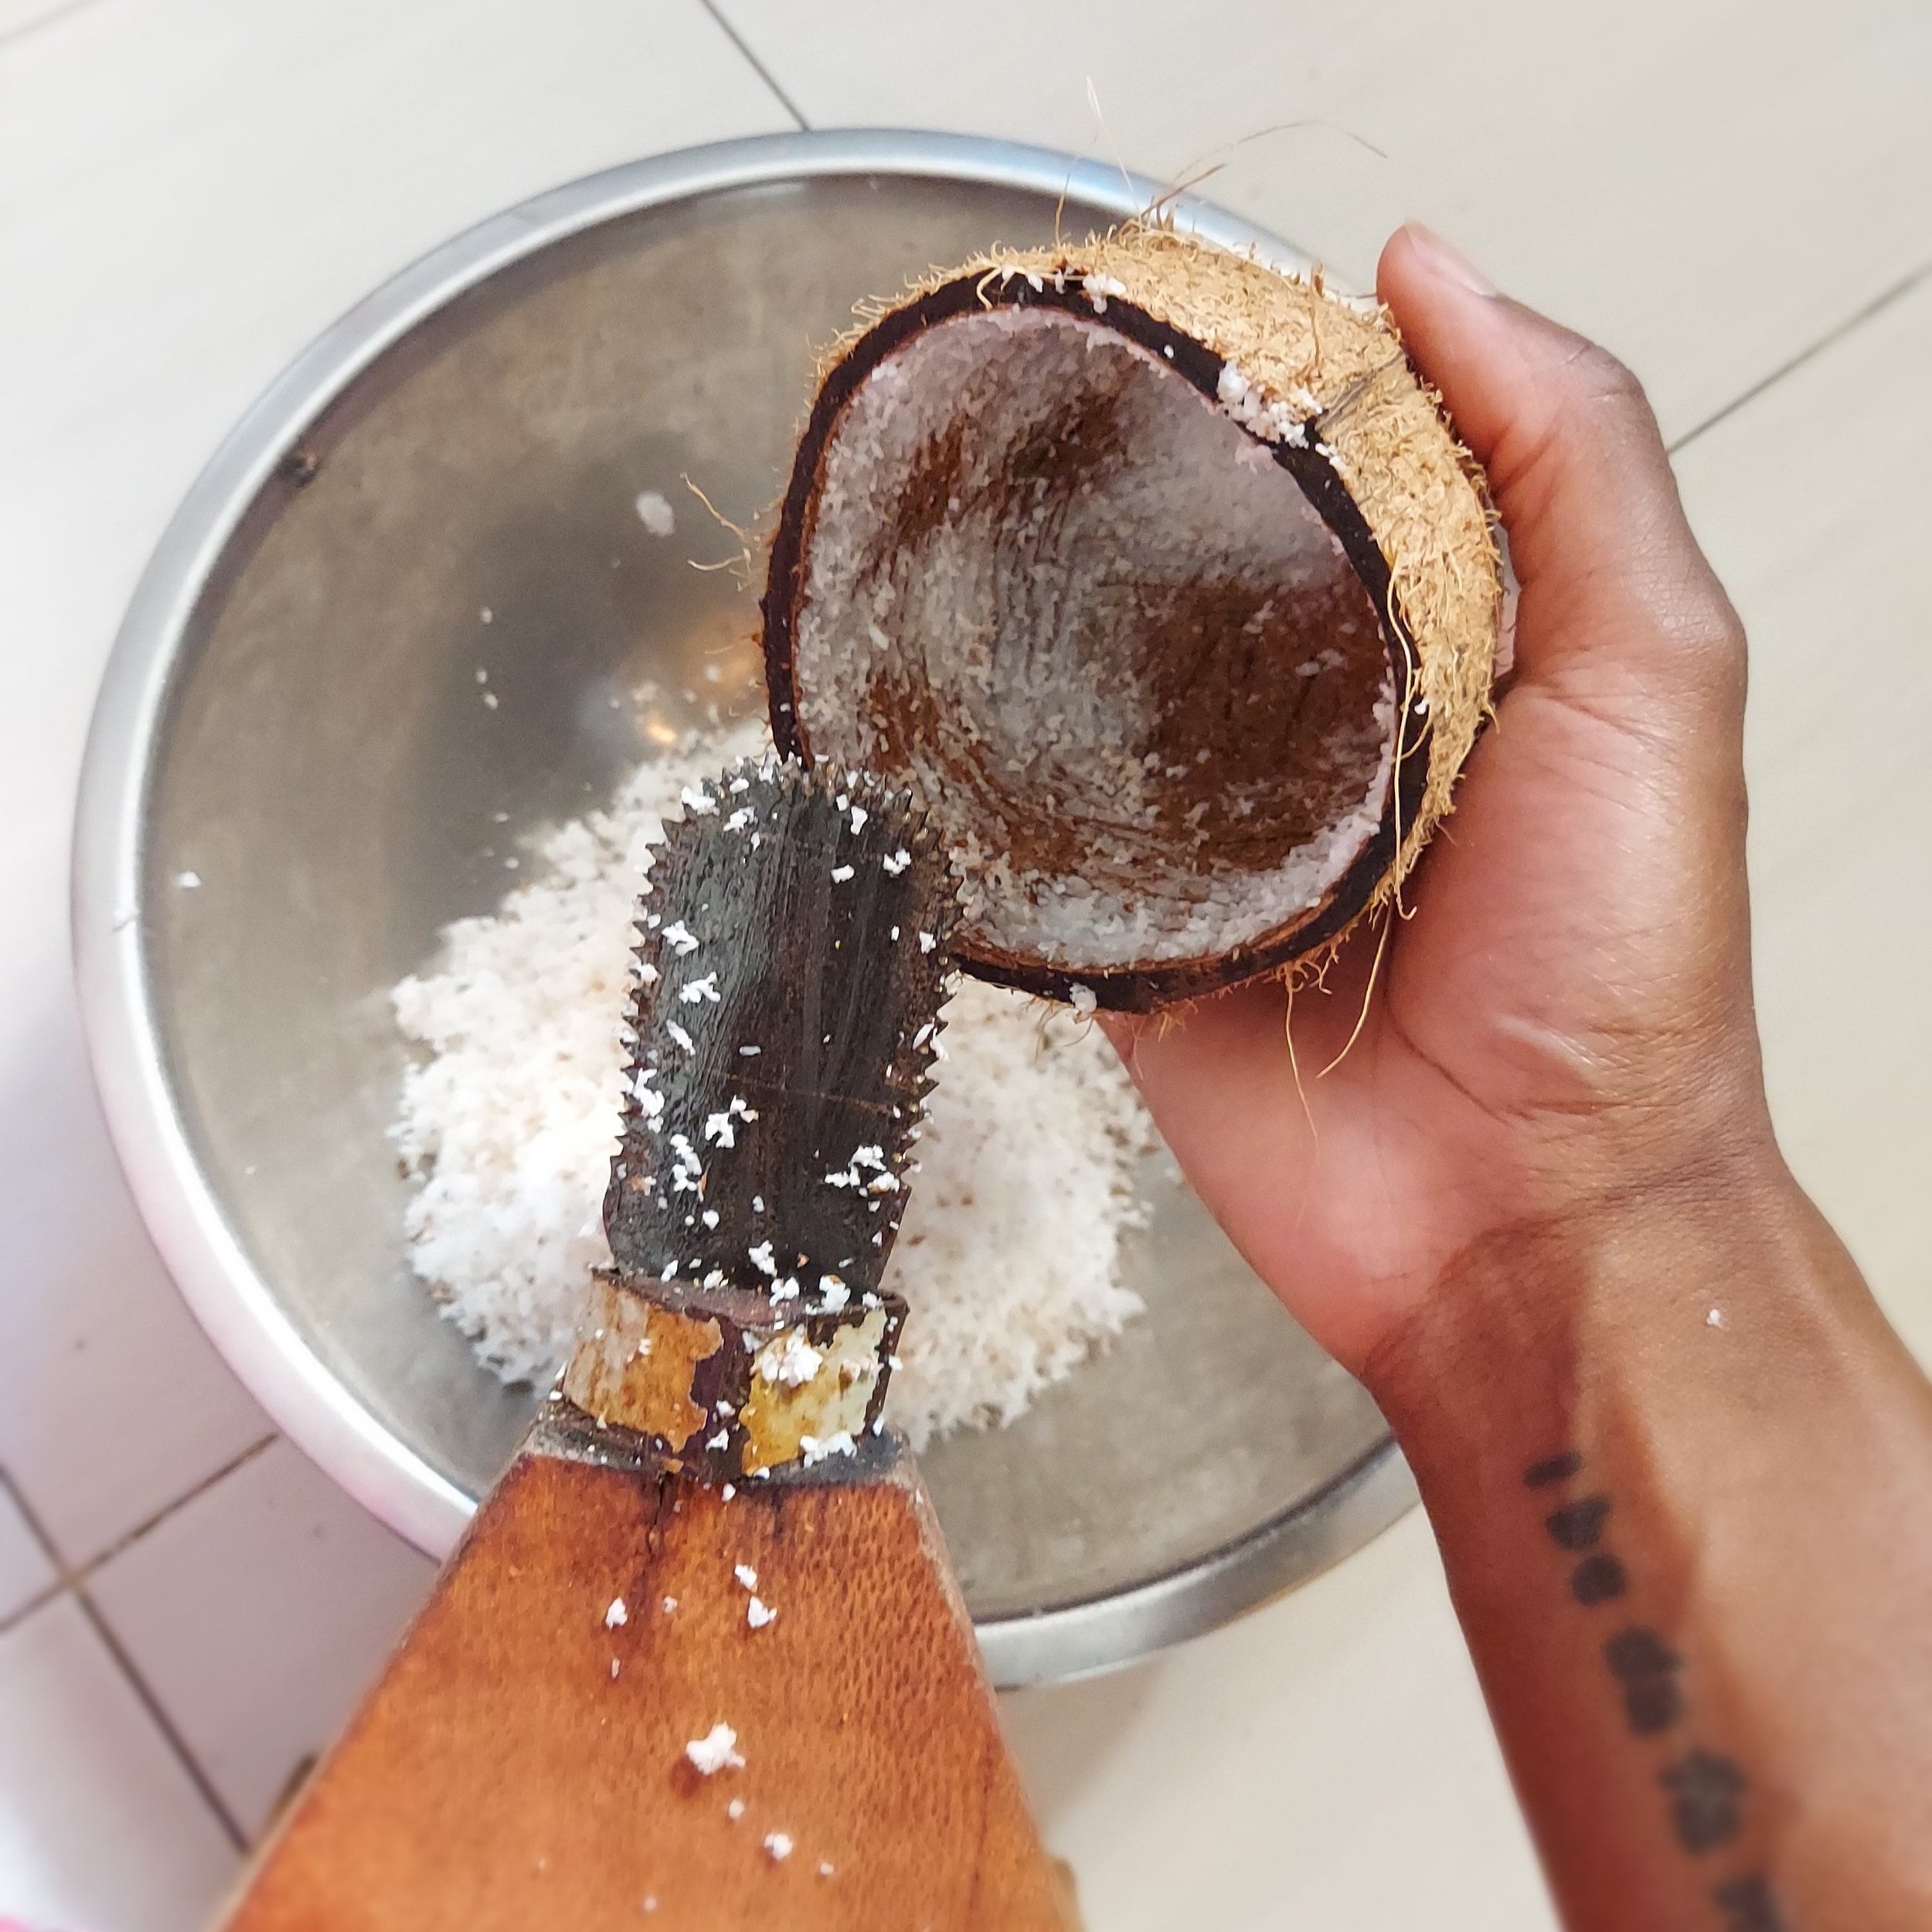 Grating the coconut on the Mbuzi